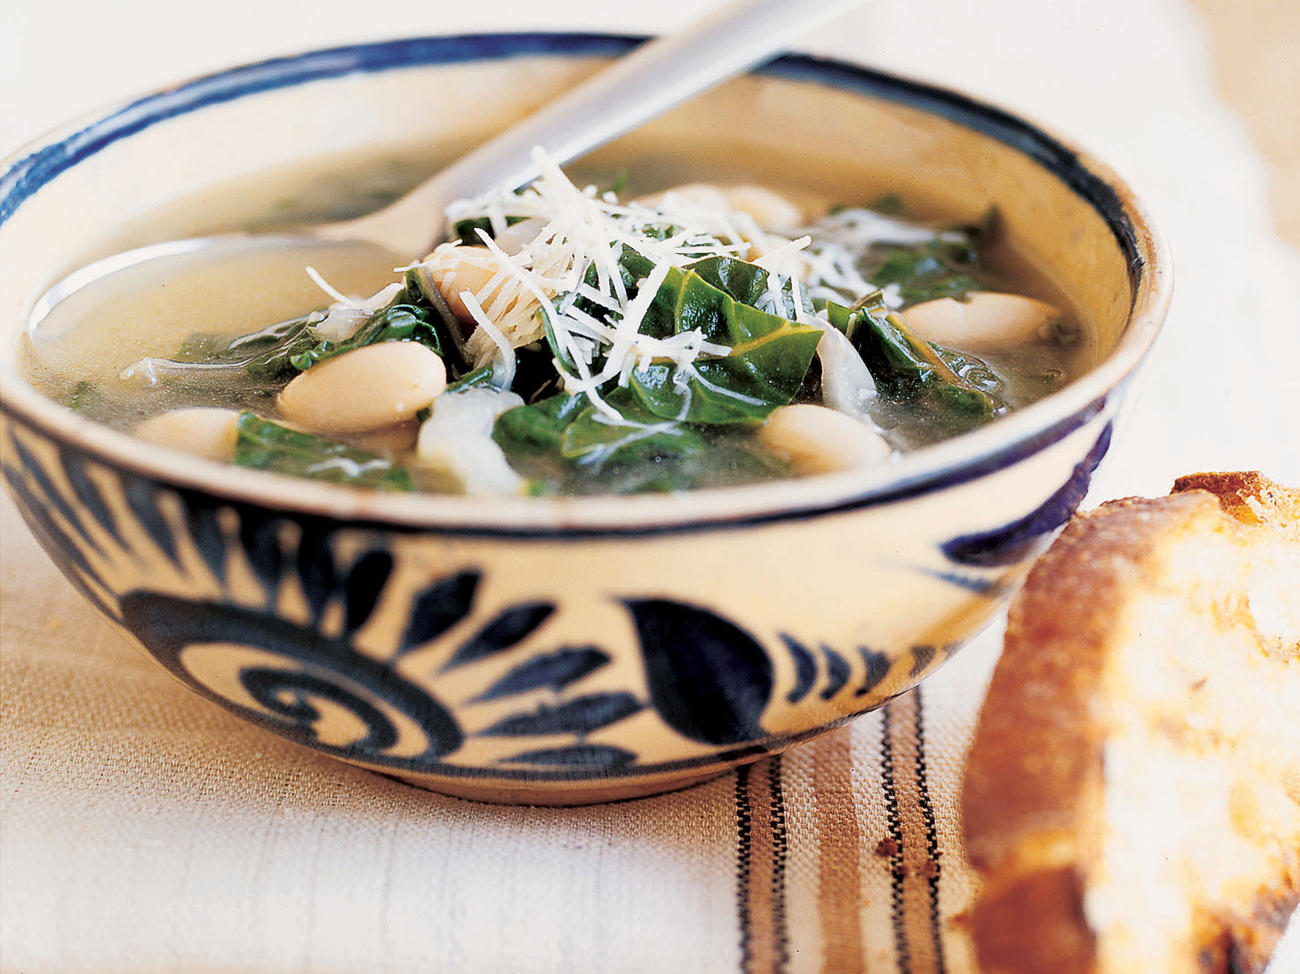 Warming soup of white beans and chard